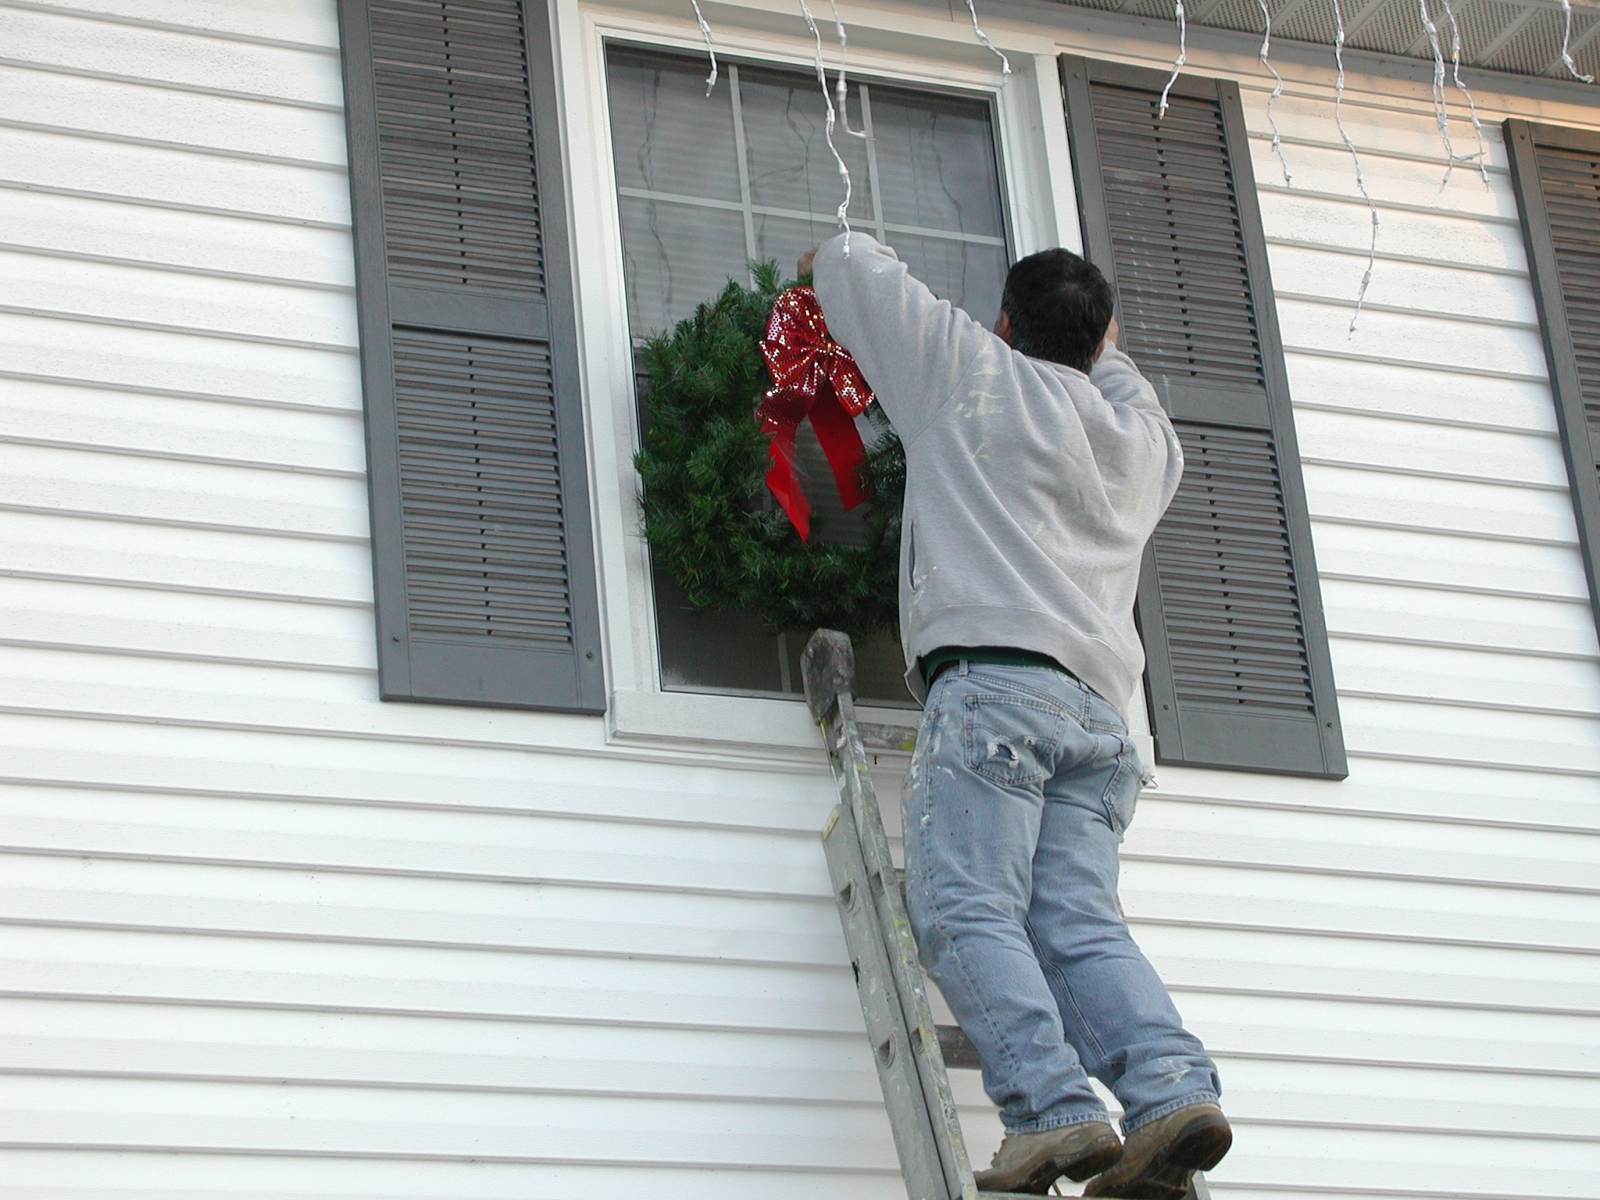 Hanging holiday decorations